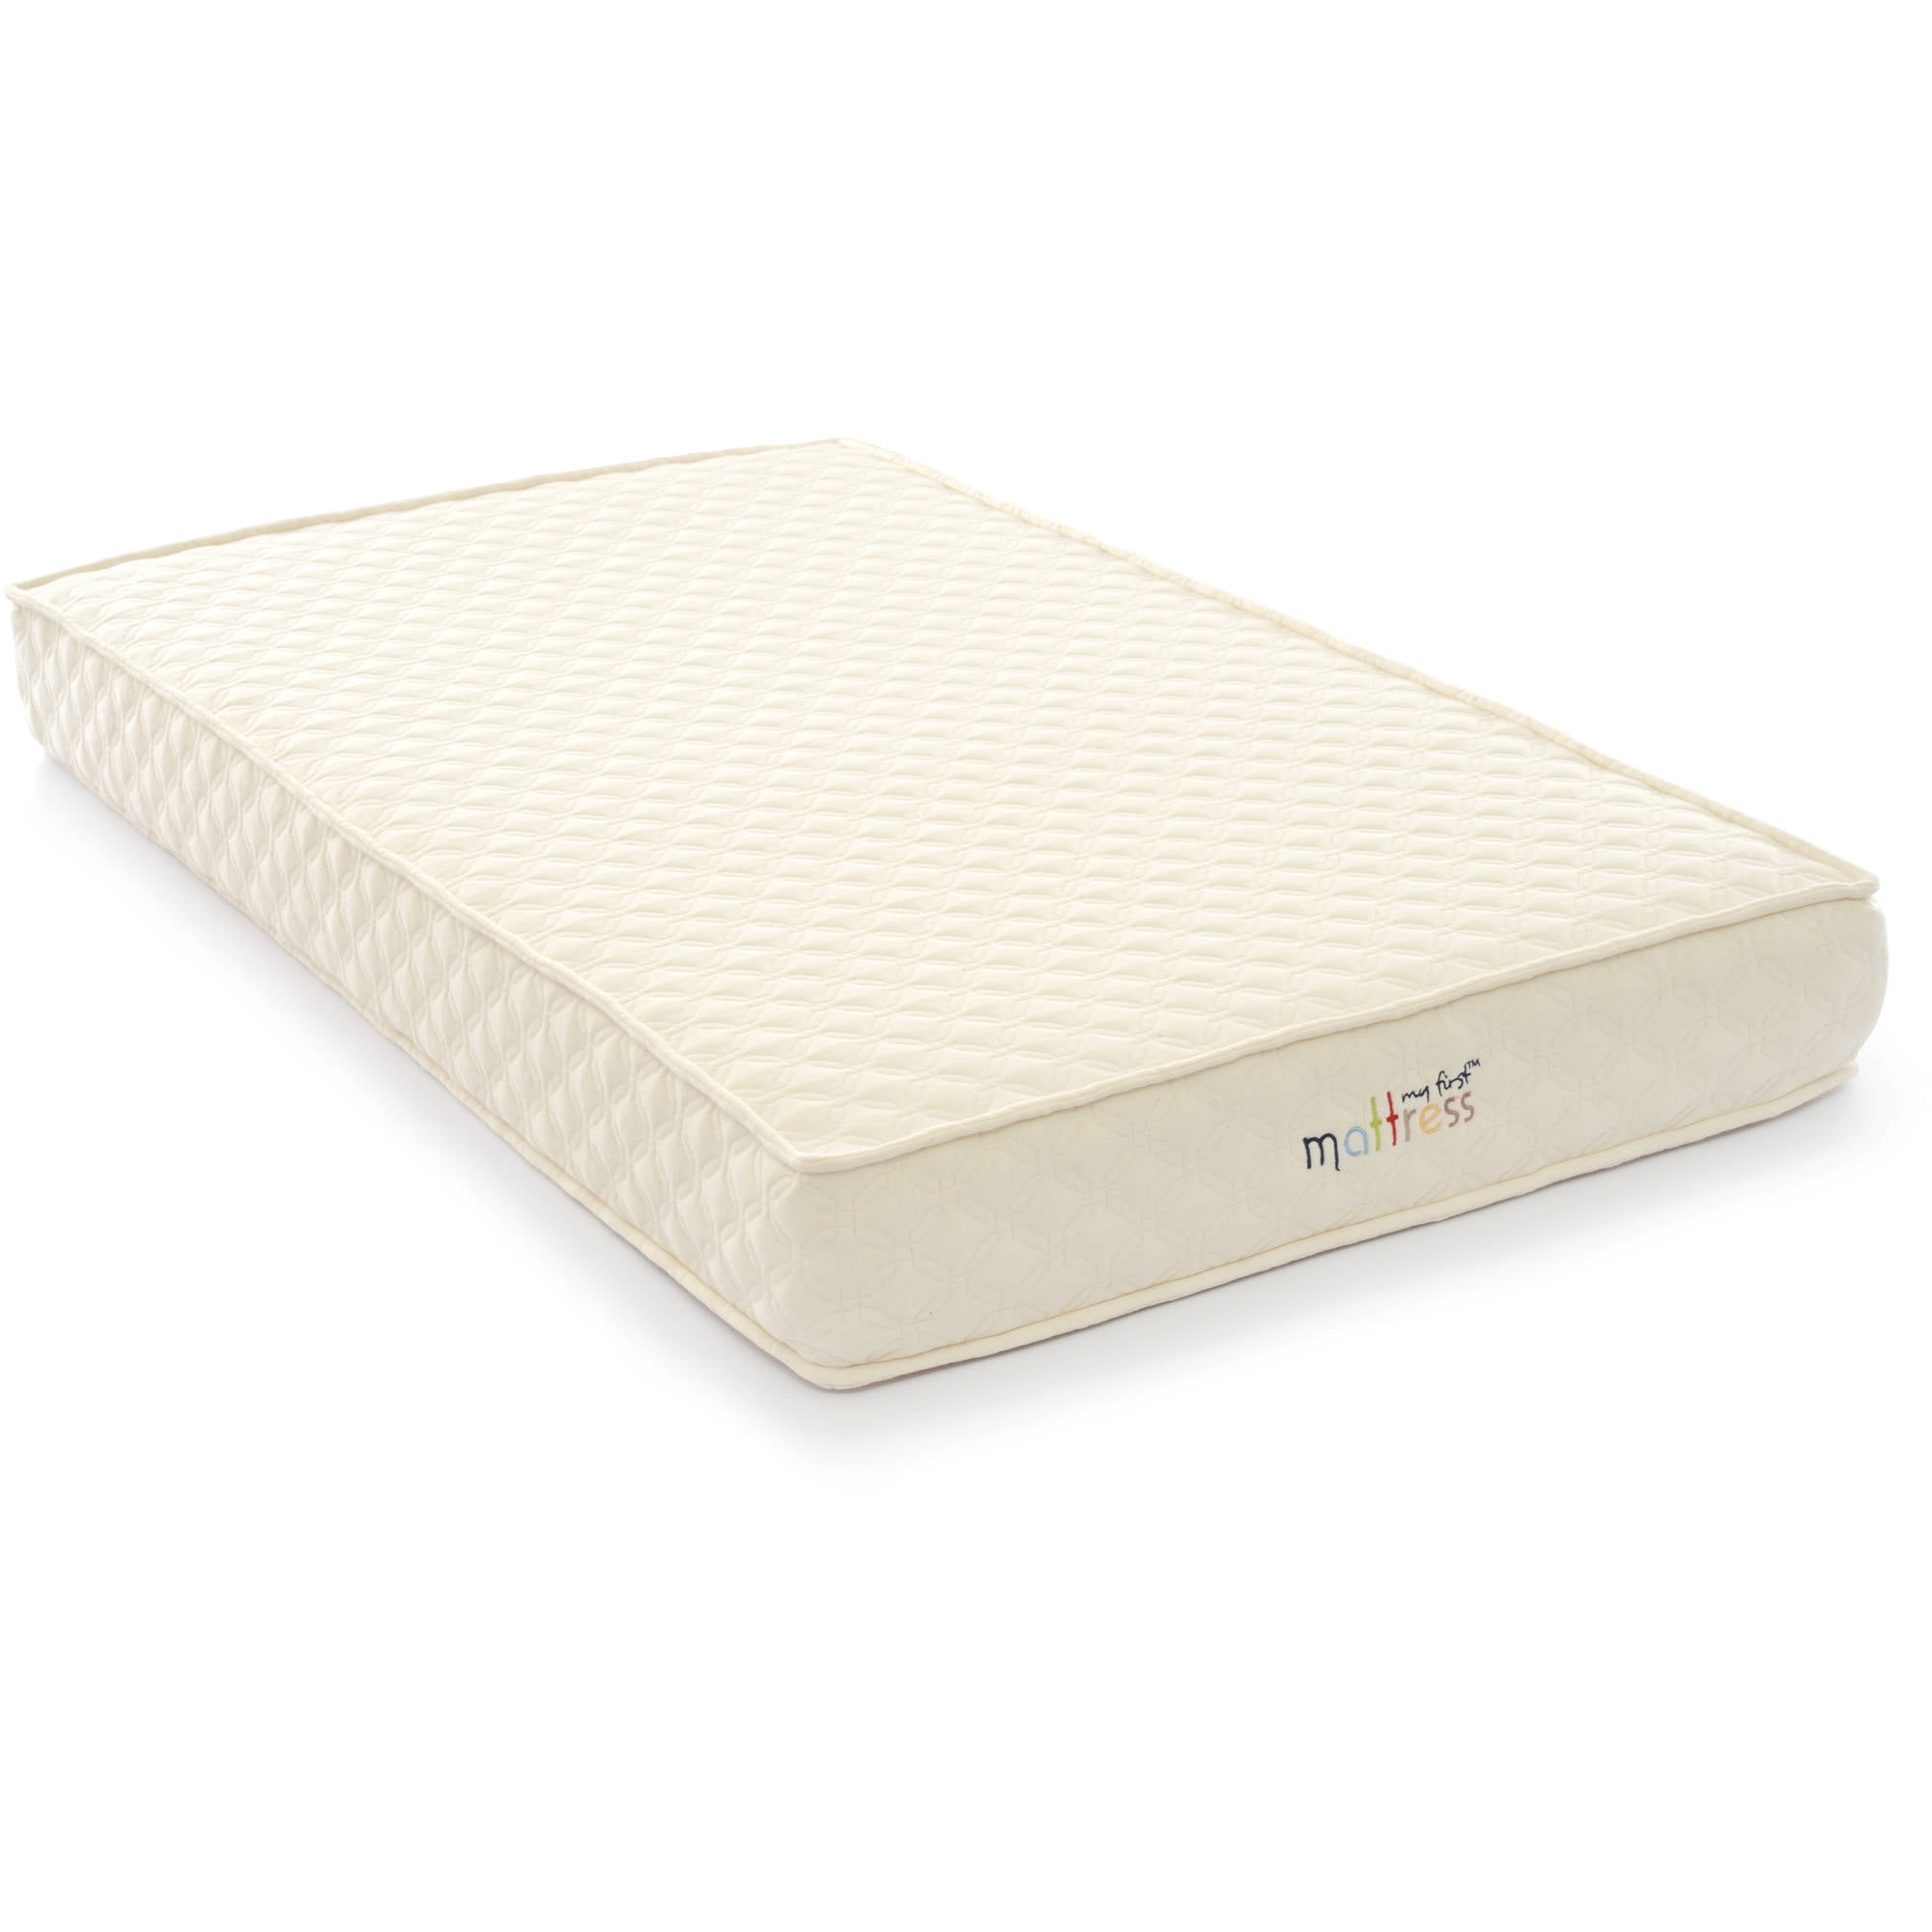 Baby Toddler Cot Bed Mattress Quilted Breathable Extra Thick 118 x 56 x 7.5 